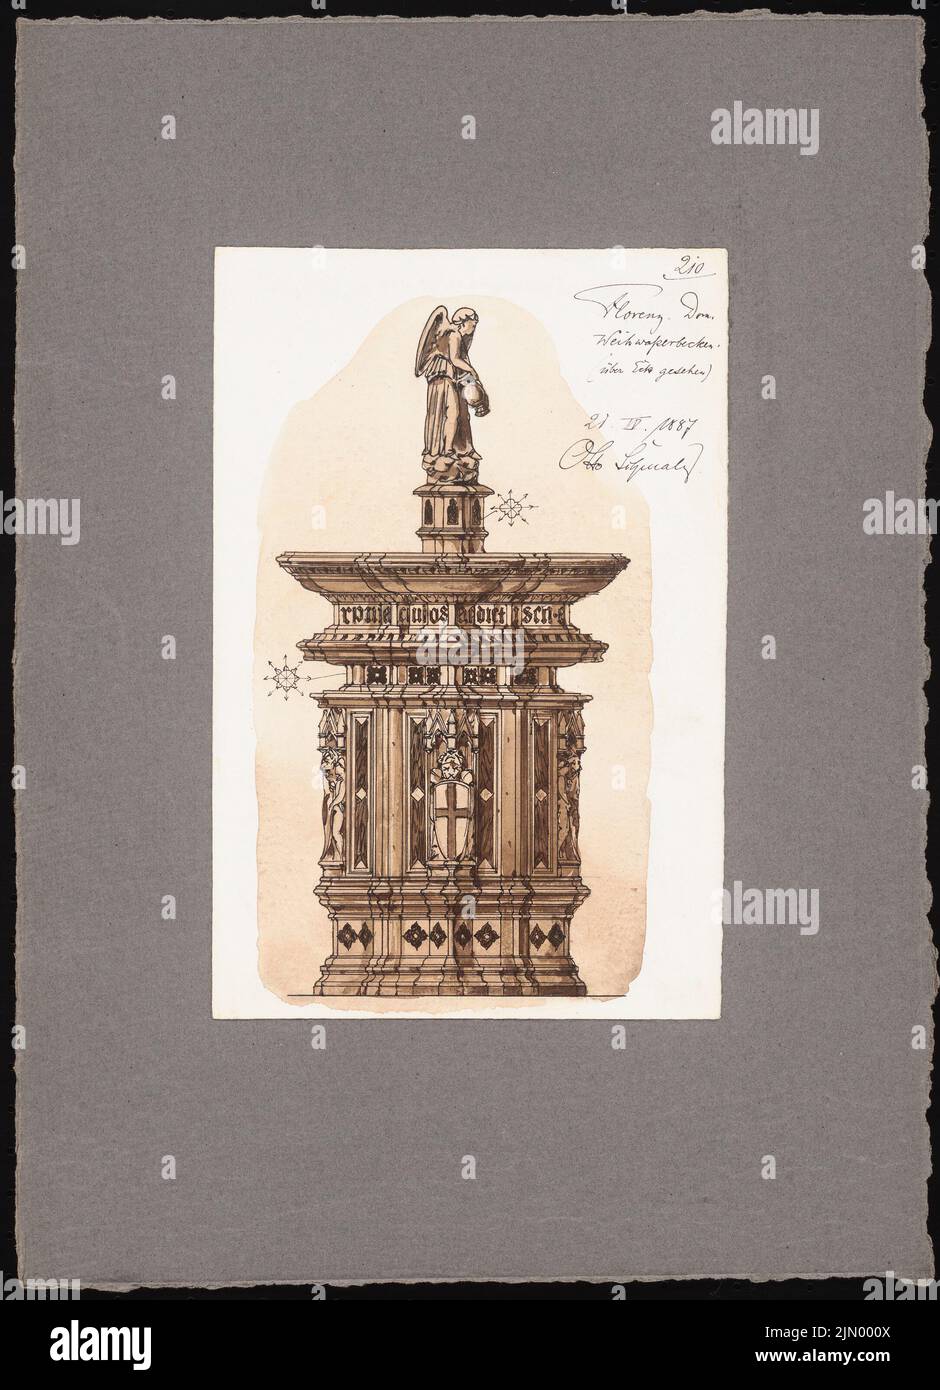 Schmalz Otto (1861-1915), travel sketches from Italy (April 21, 1887): Florence: Cathedral (View holy water basin). Tusche watercolor on paper, 43.1 x 31.1 cm (including scan edges) Stock Photo